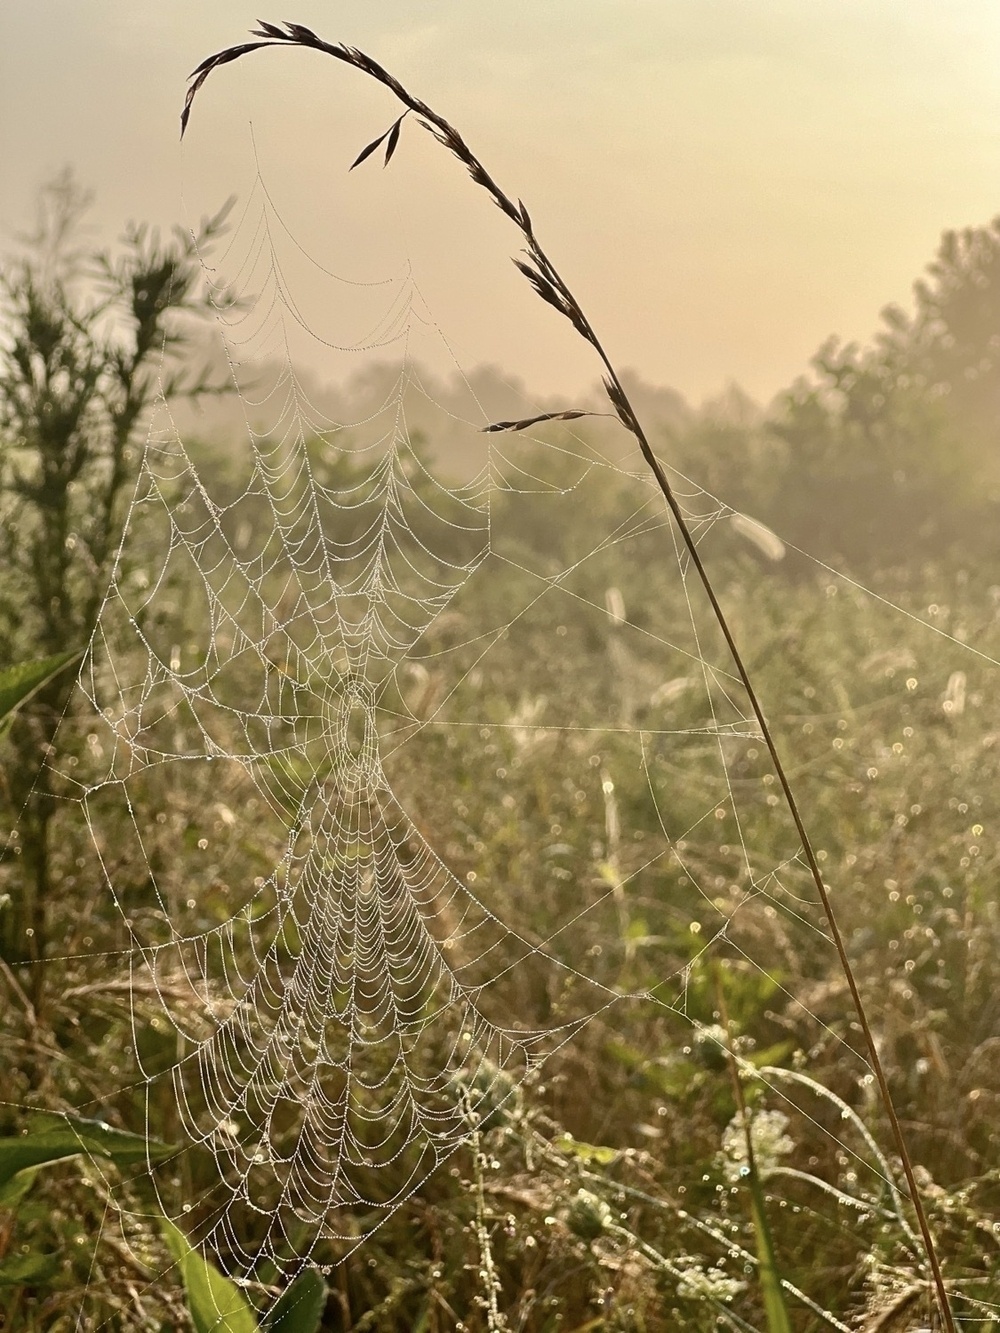 A dew covered spiders web hangs from a tall seed head of grass and drapes downward towards other grasses. The web is lit from behind by golden morning sun which also sets the field behind the web in a soft gold glow